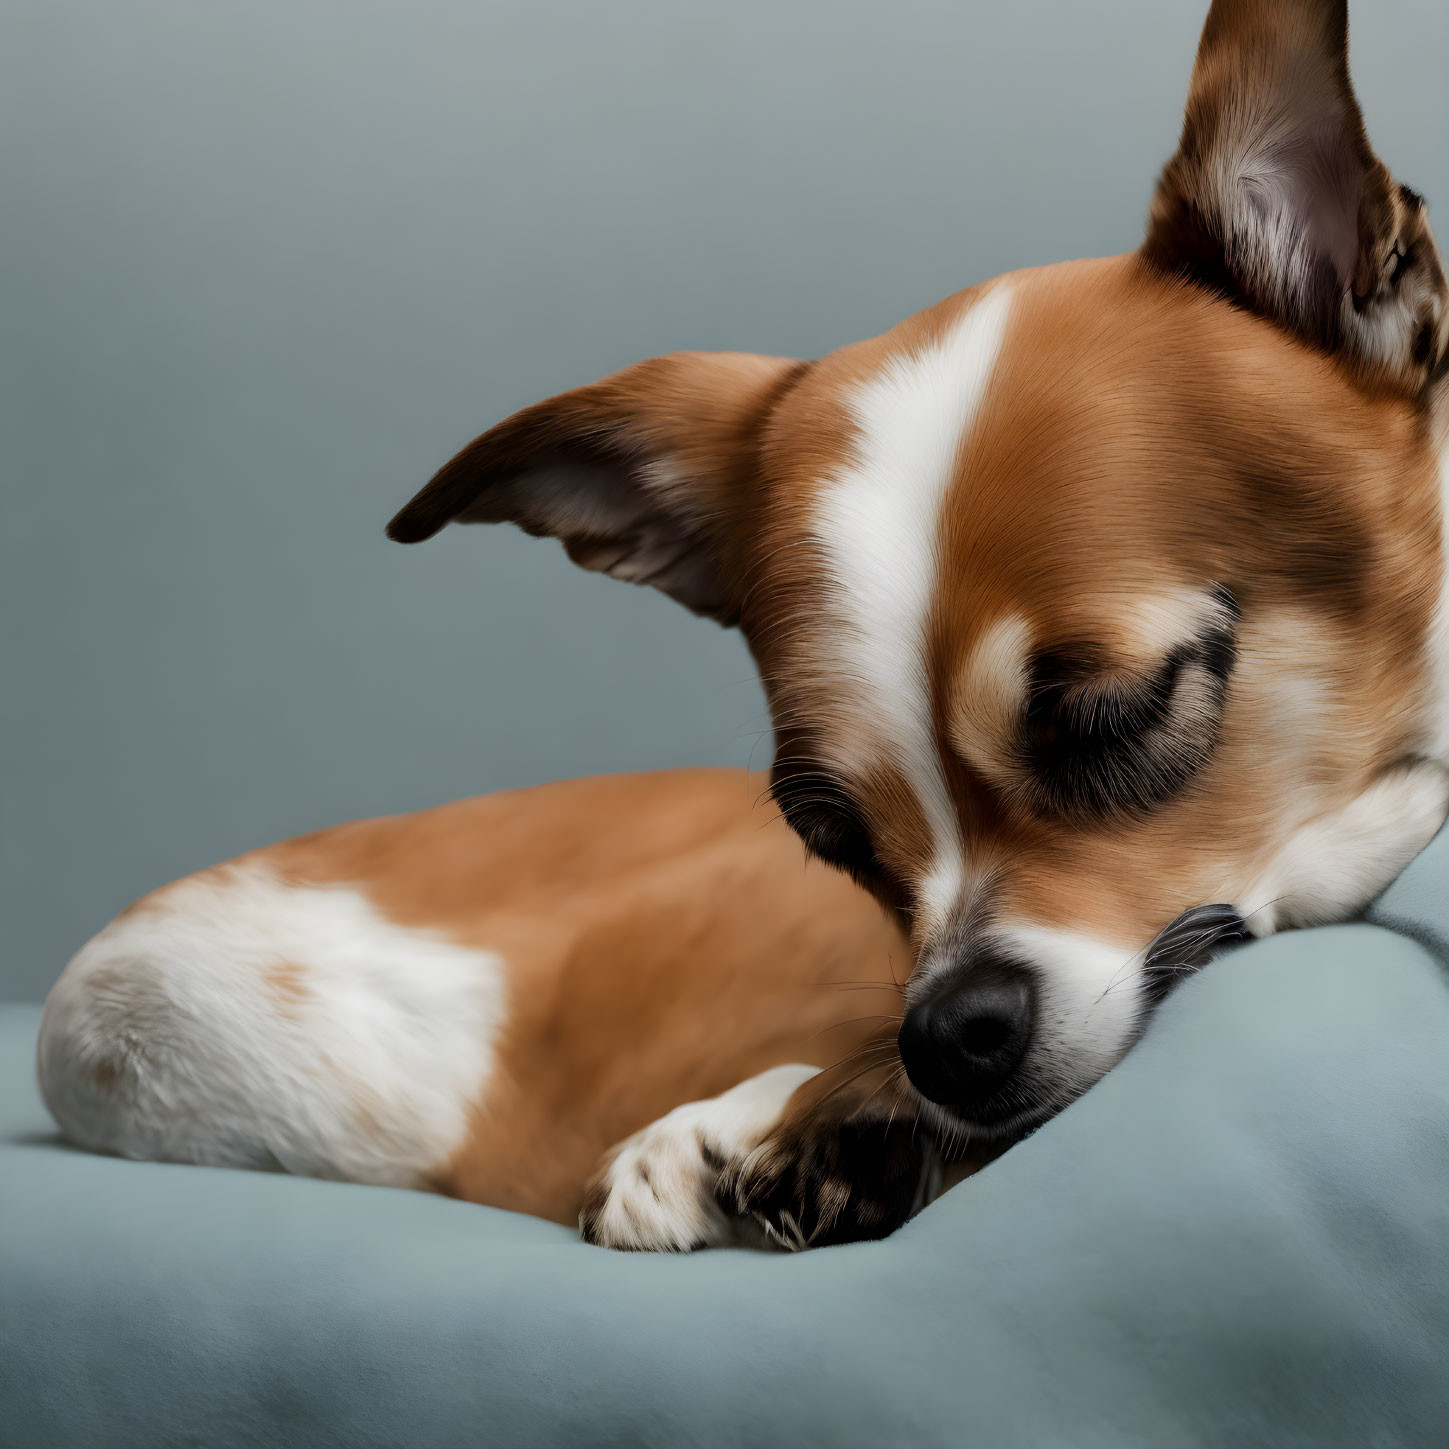 Brown and White Dog Resting on Blue Cushion Against Gray Background